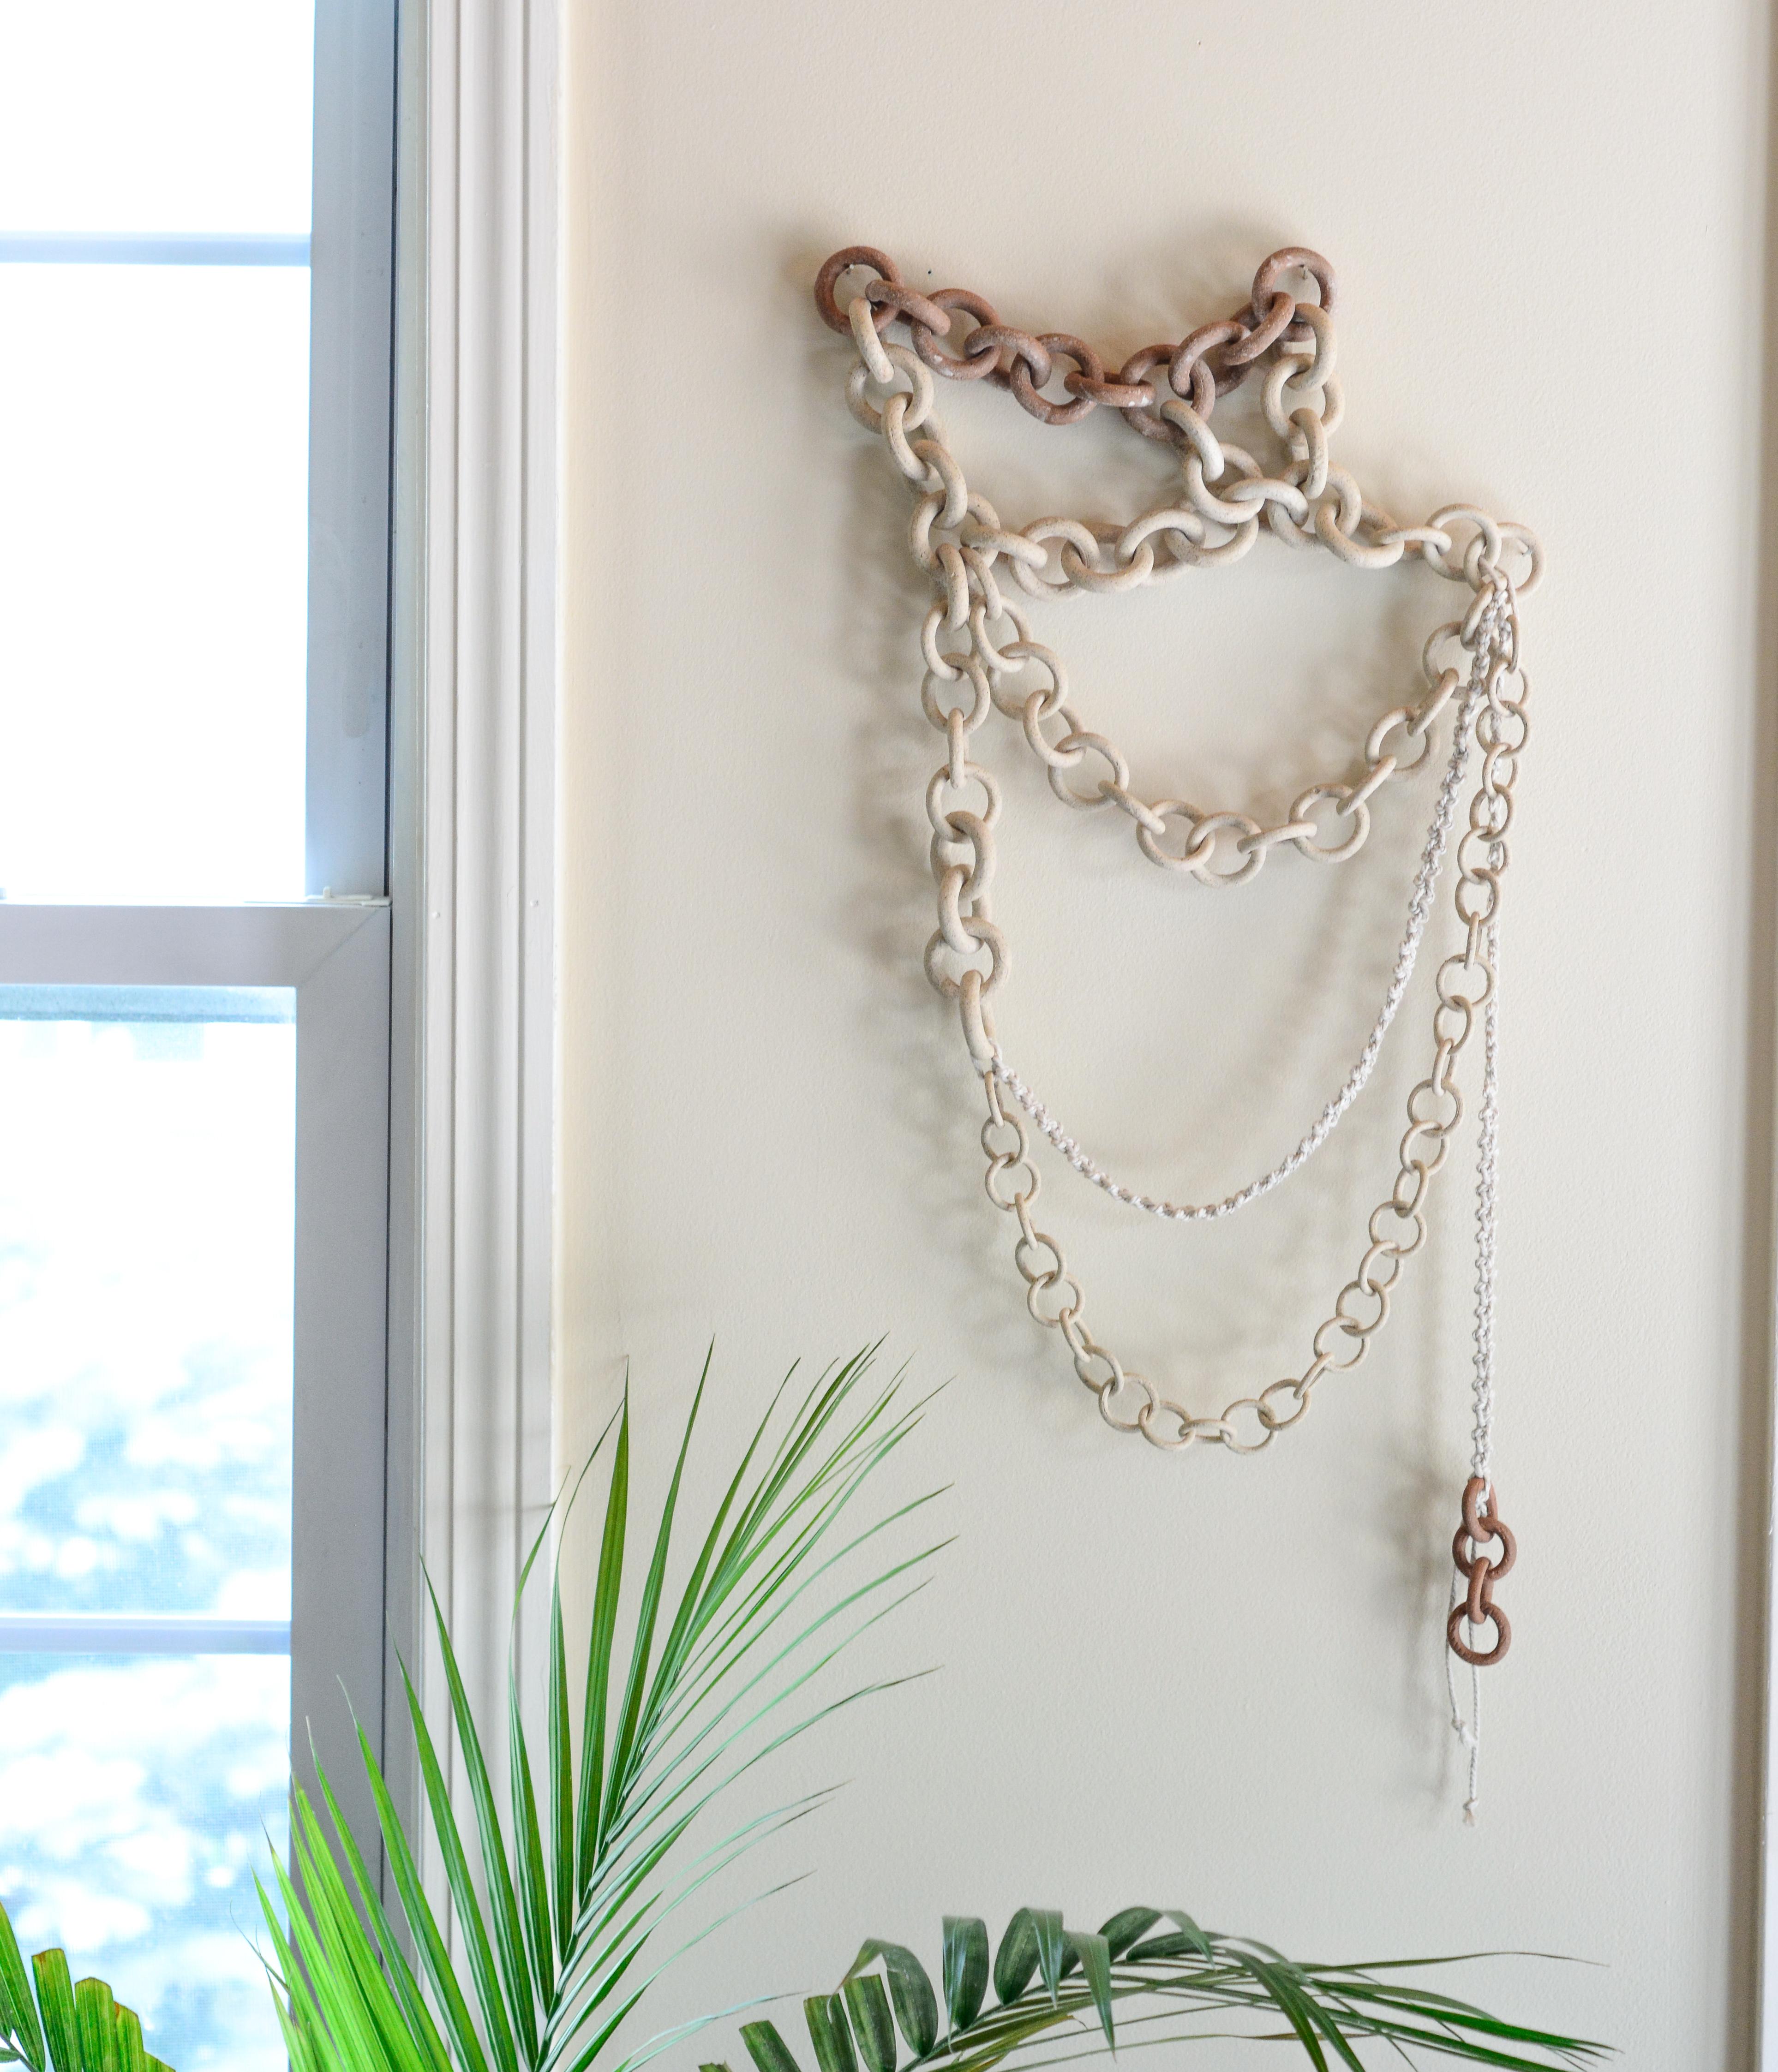 Bohemian Ceramic Link Chain Wall Sculpture For Sale